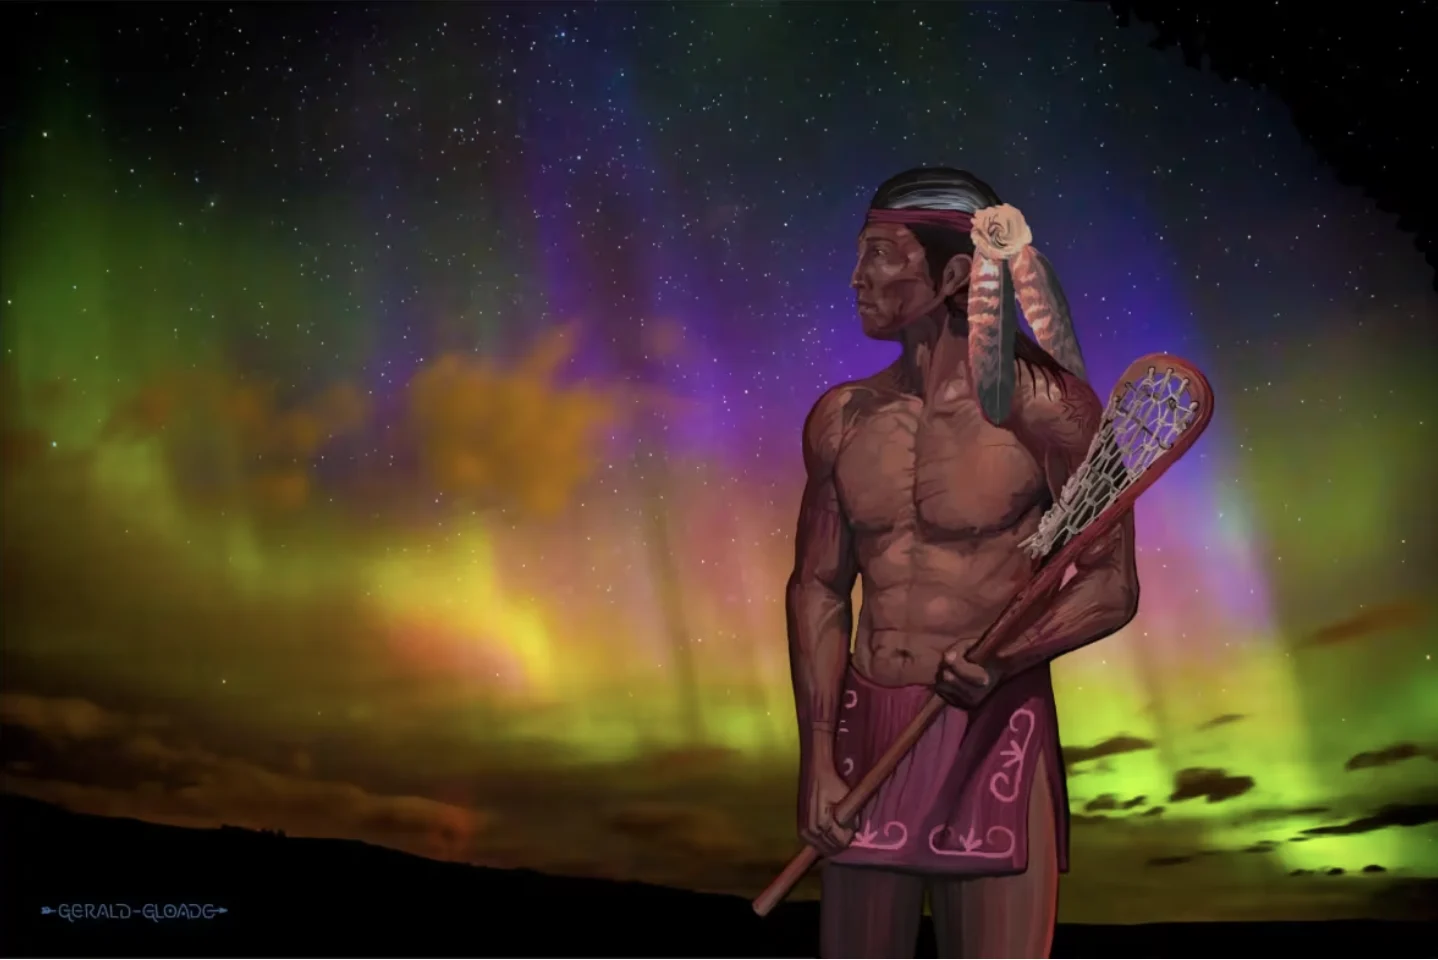 CBC: In this artwork by Gerald Gloade, the northern lights are seen behind the spirit of an Indigenous ancestor who plays lacrosse in Wasoq, Mi'kmaw heaven. (Gerald Gloade)